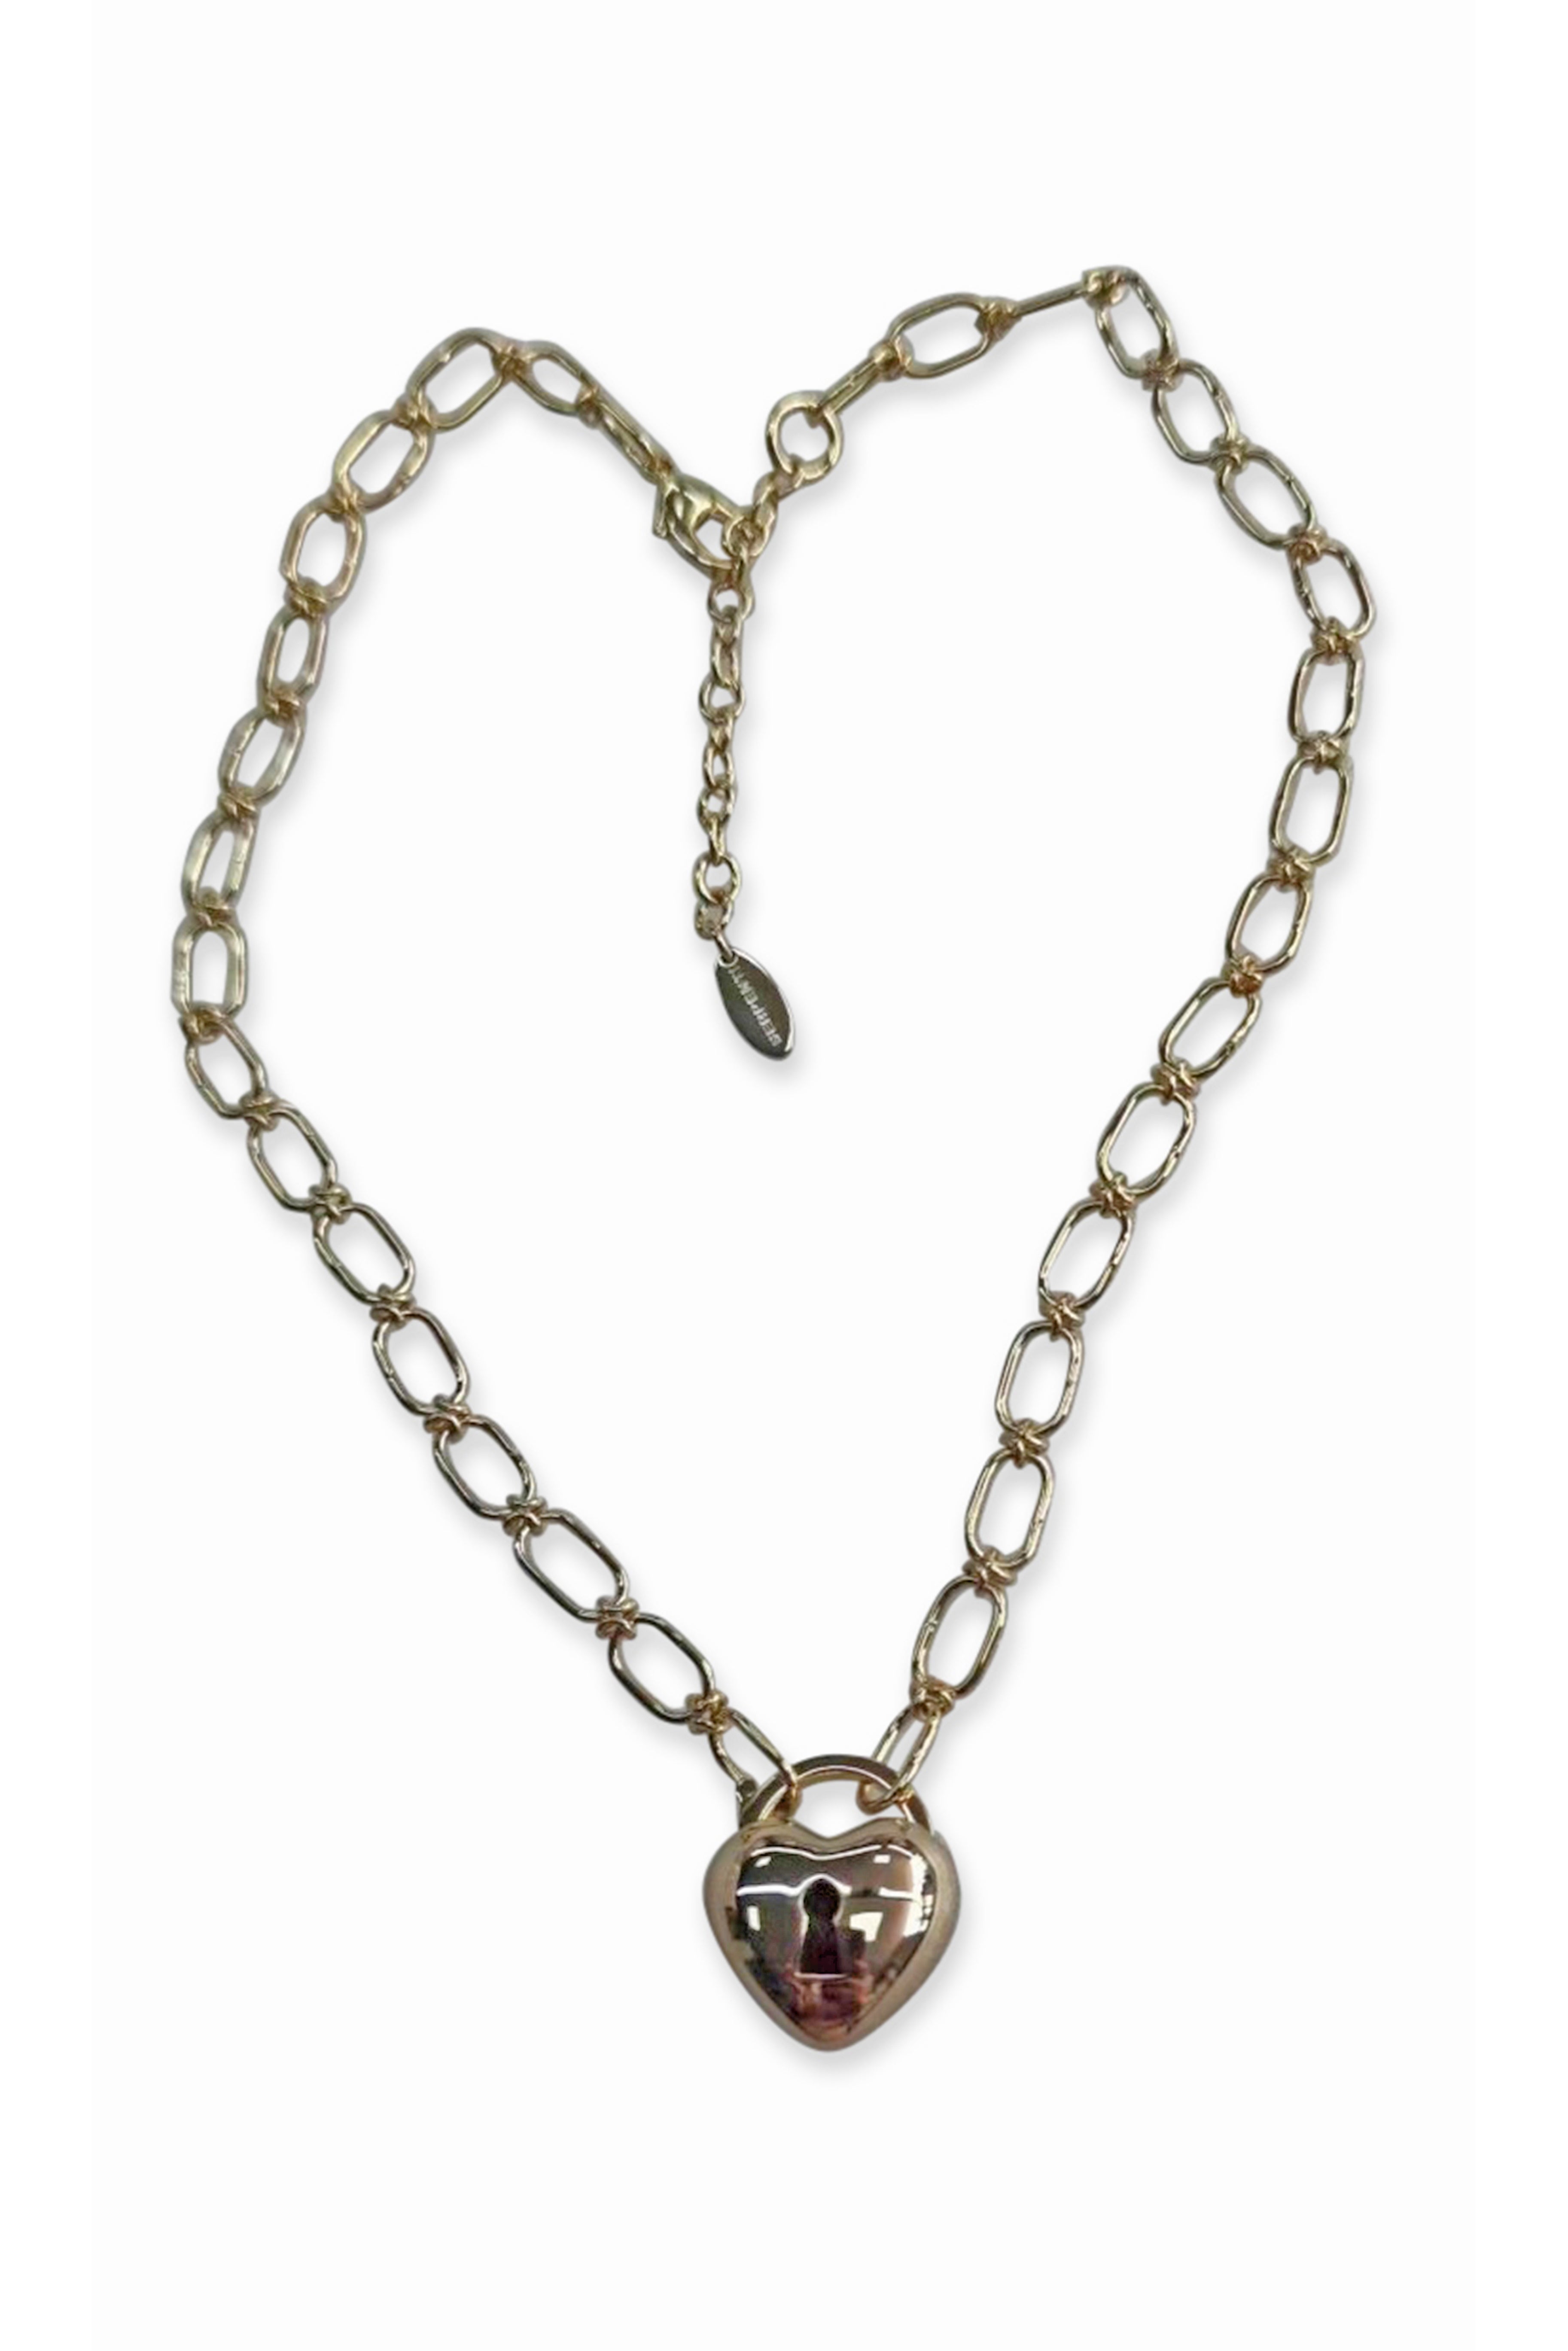 The Locket Charm Necklace